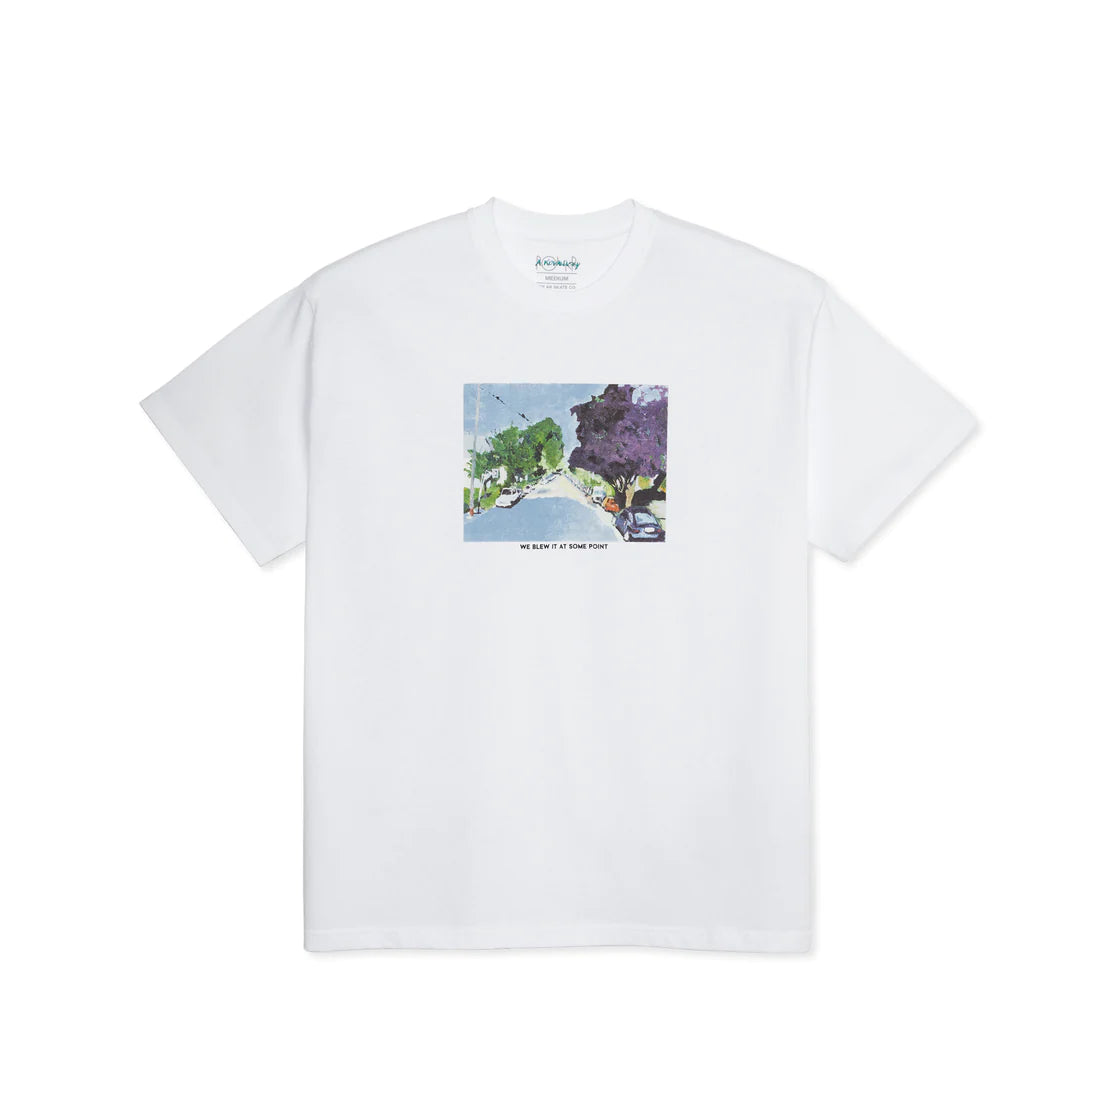 Polar We Blew It At Some Point White S/s Shirt